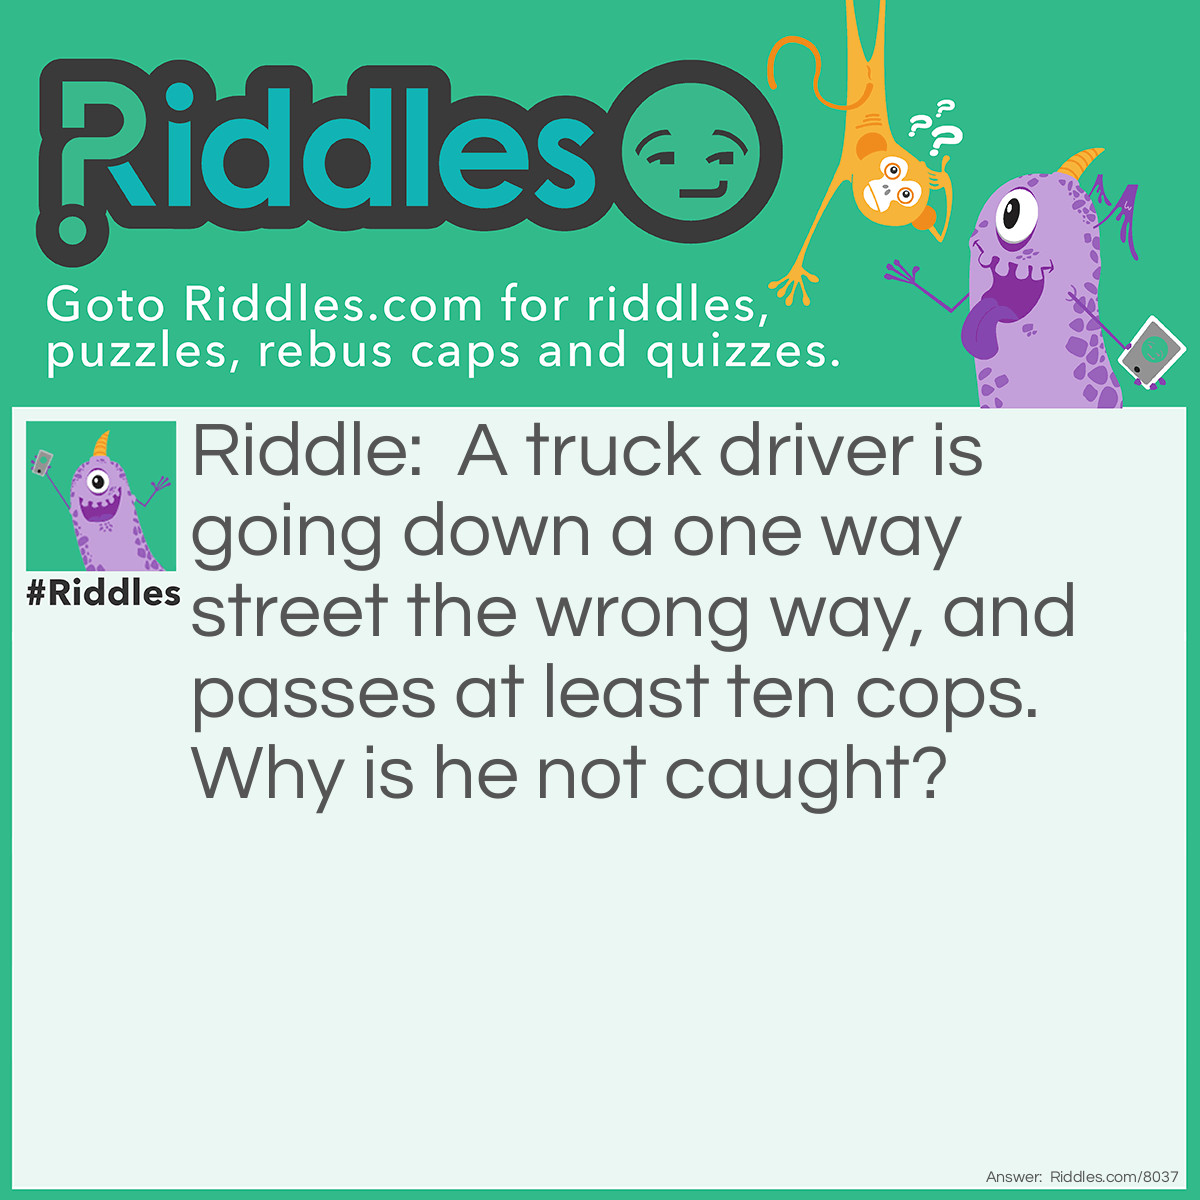 Riddle: A truck driver is going down a one way street the wrong way, and passes at least ten cops. Why is he not caught? Answer: He was walking, on the sidewalk!